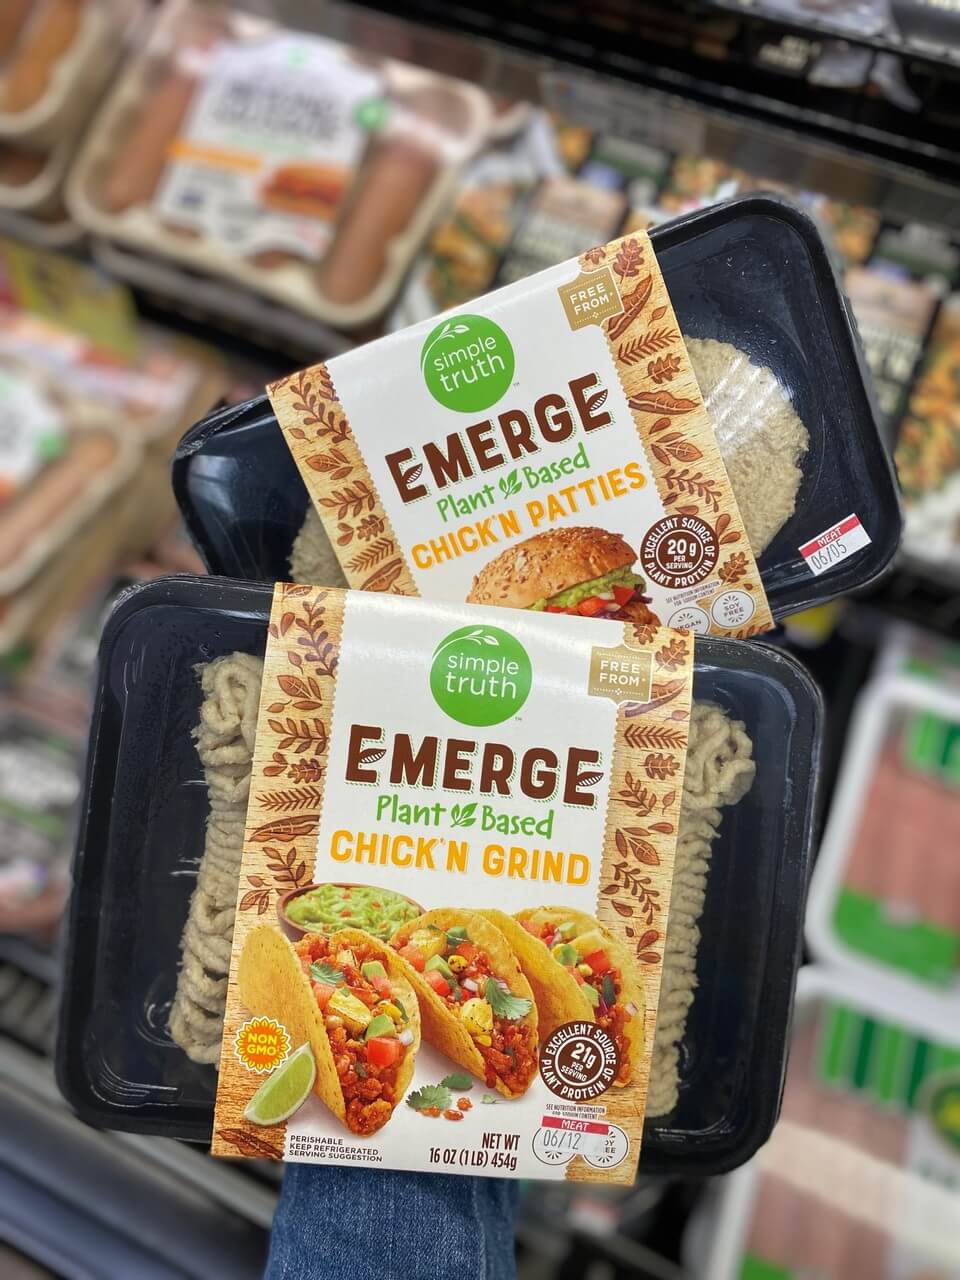 Emerge Plant-Based Chick’n Grind and Patties